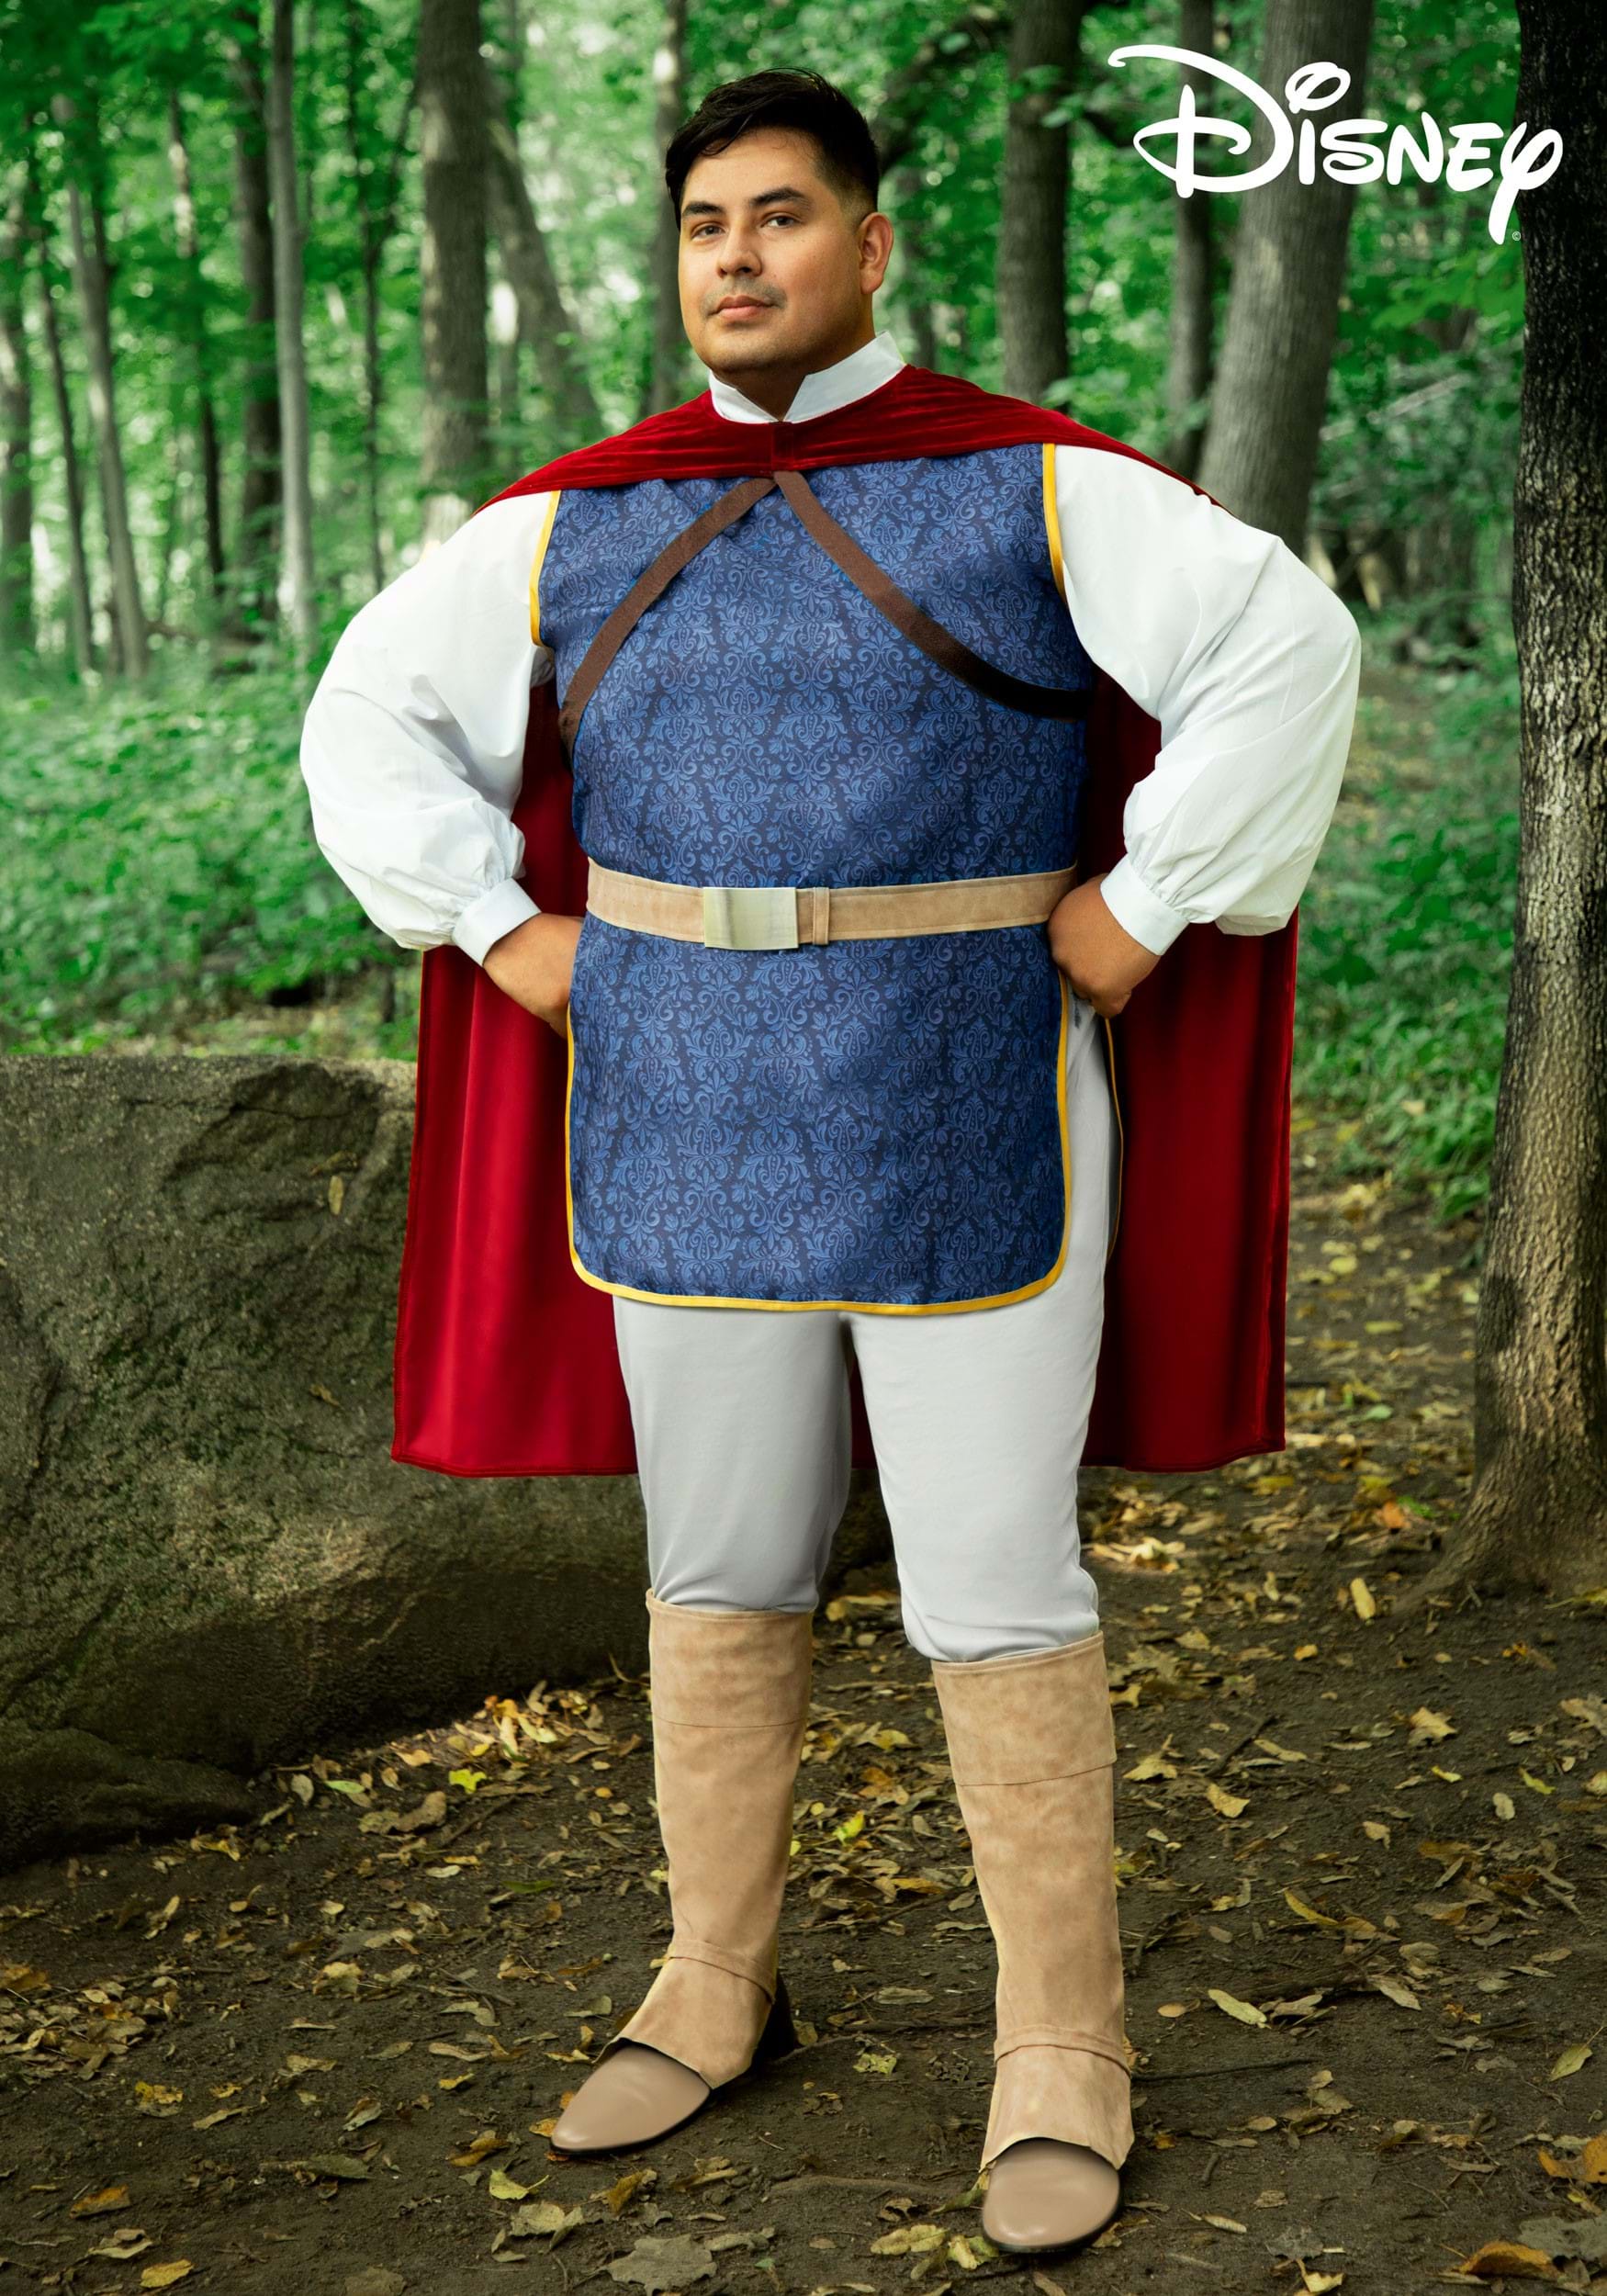 https://images.halloweencostumes.ca/products/68964/1-1/snow-white-the-prince-mens-plus-size-costume-upd.jpg